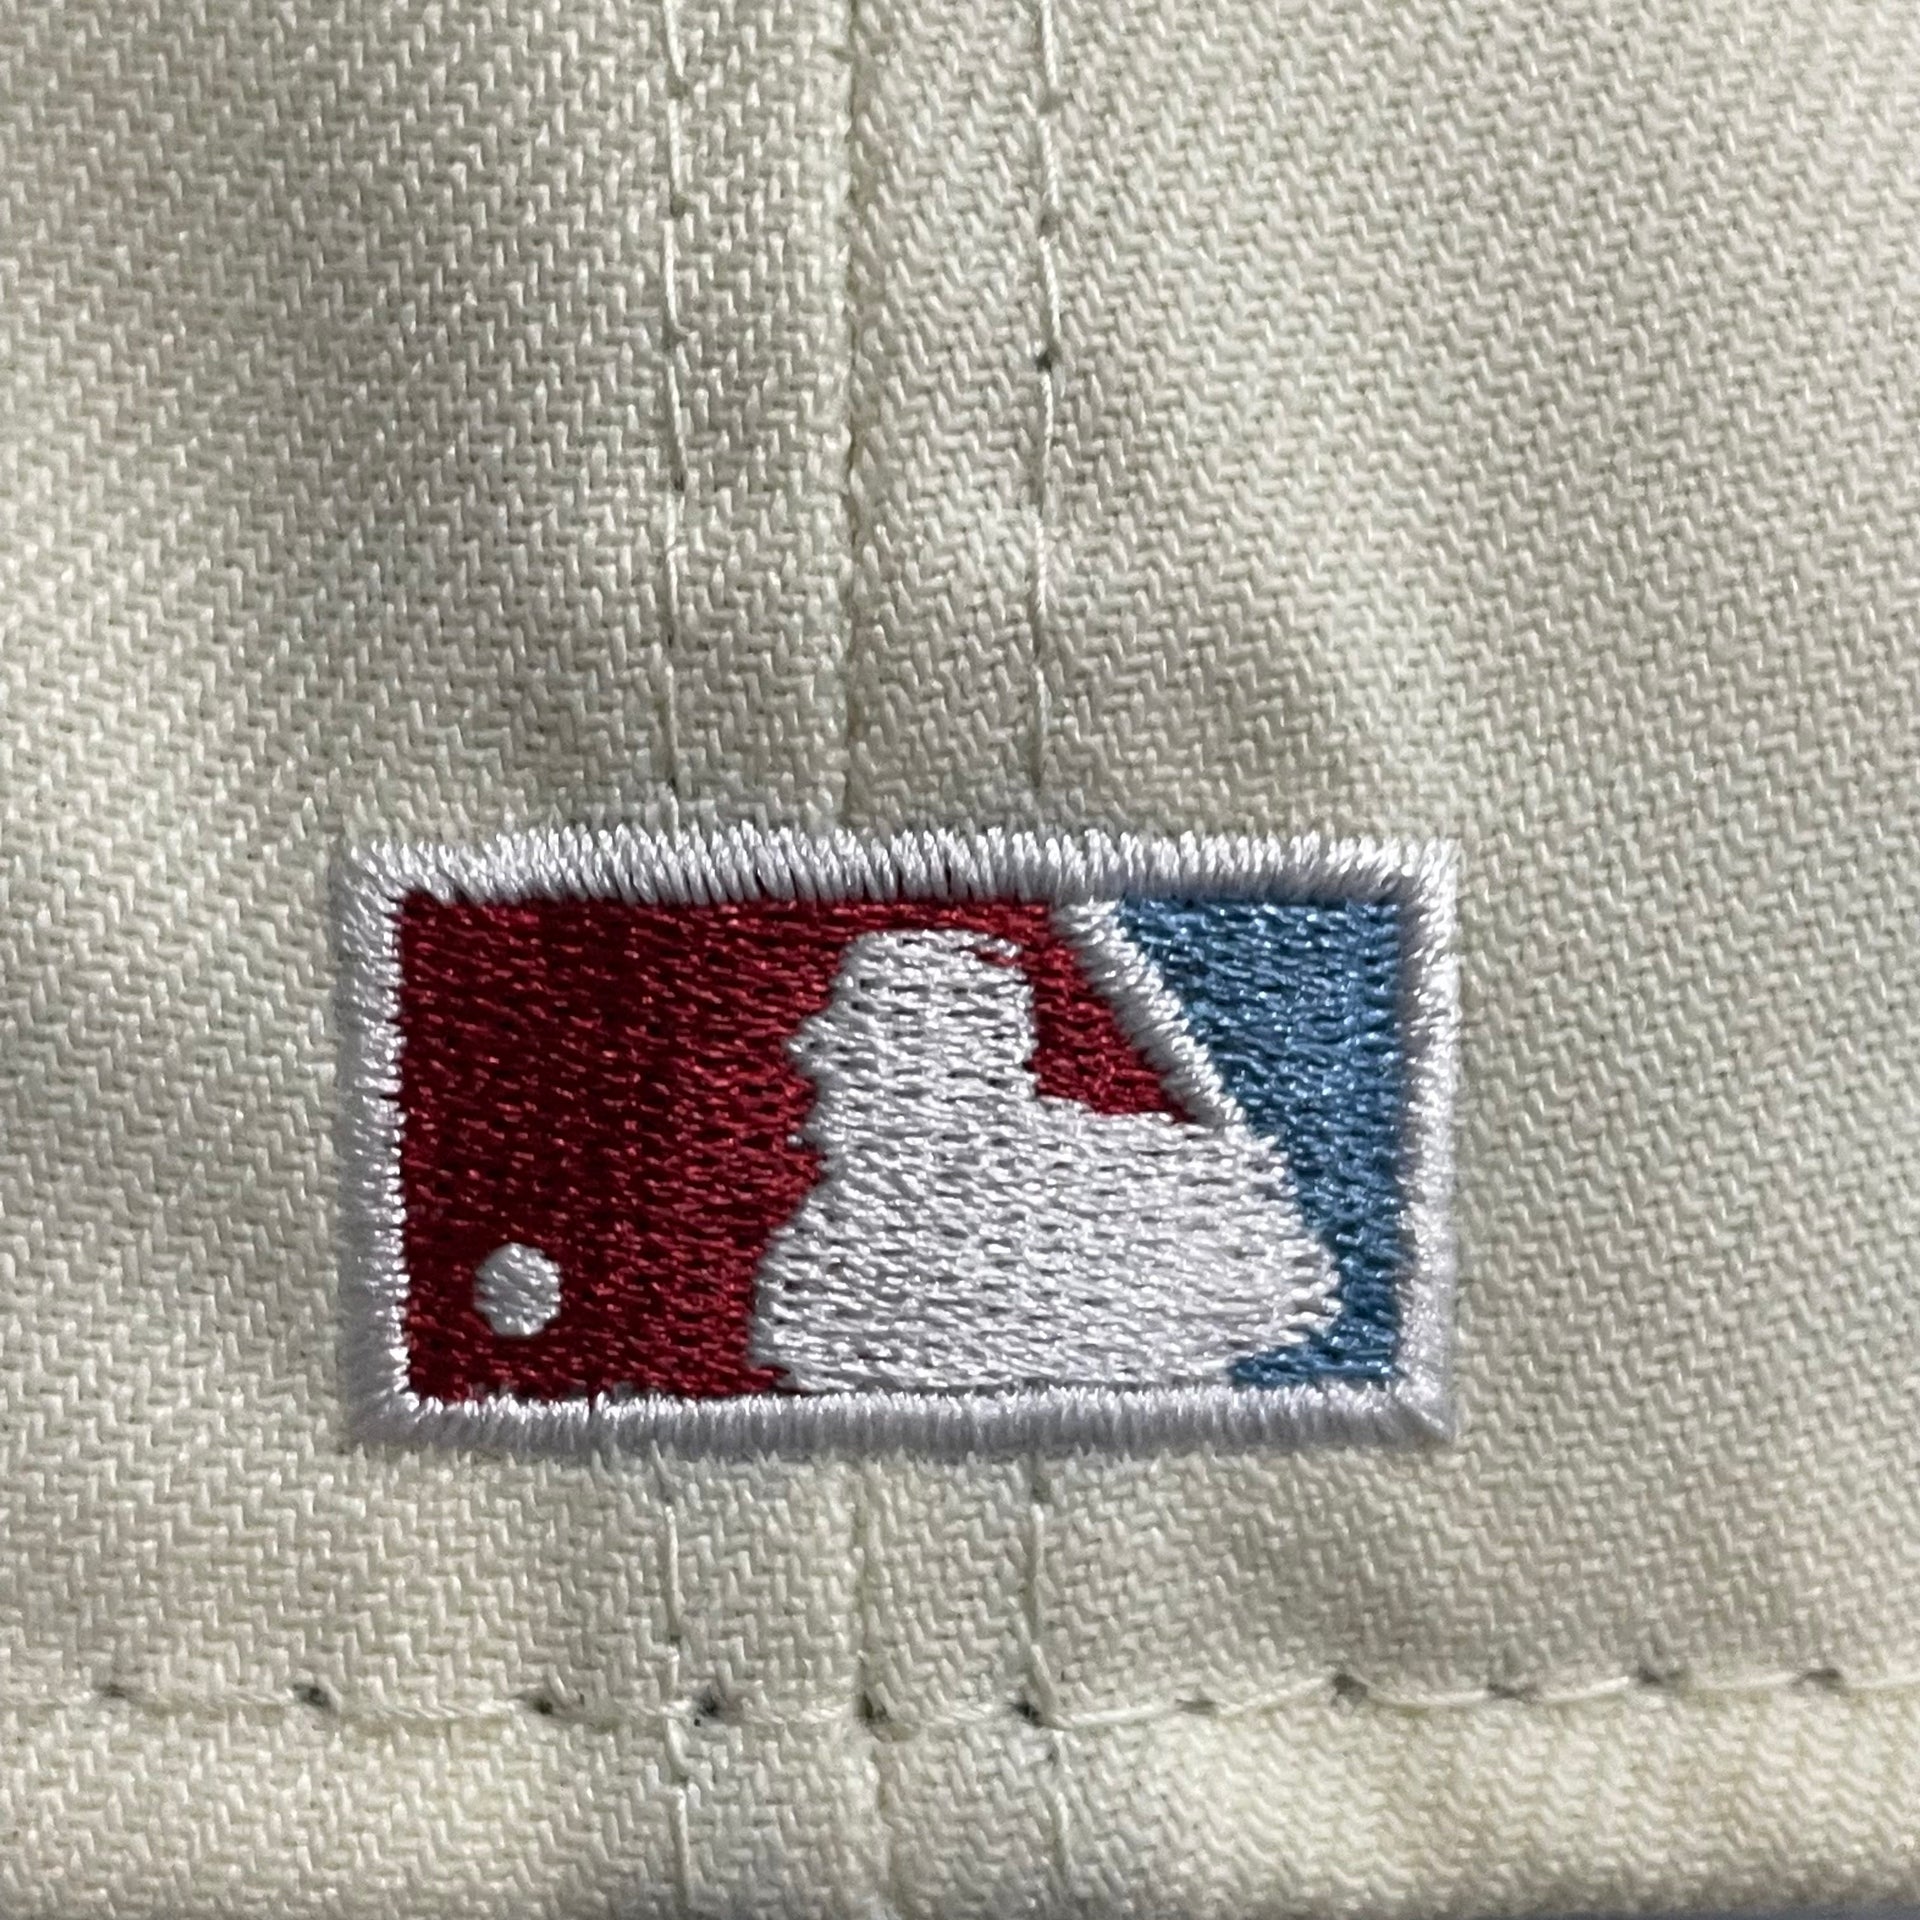 Flat Cooperstown batterman logo on the back of the Philadelphia Phillies Cooperstown City Hall Logo Veterans Stadium Side Patch Powder Blue UV 59Fifty Fitted Cap | Chrome/Maroon Cap Swag Exclusive